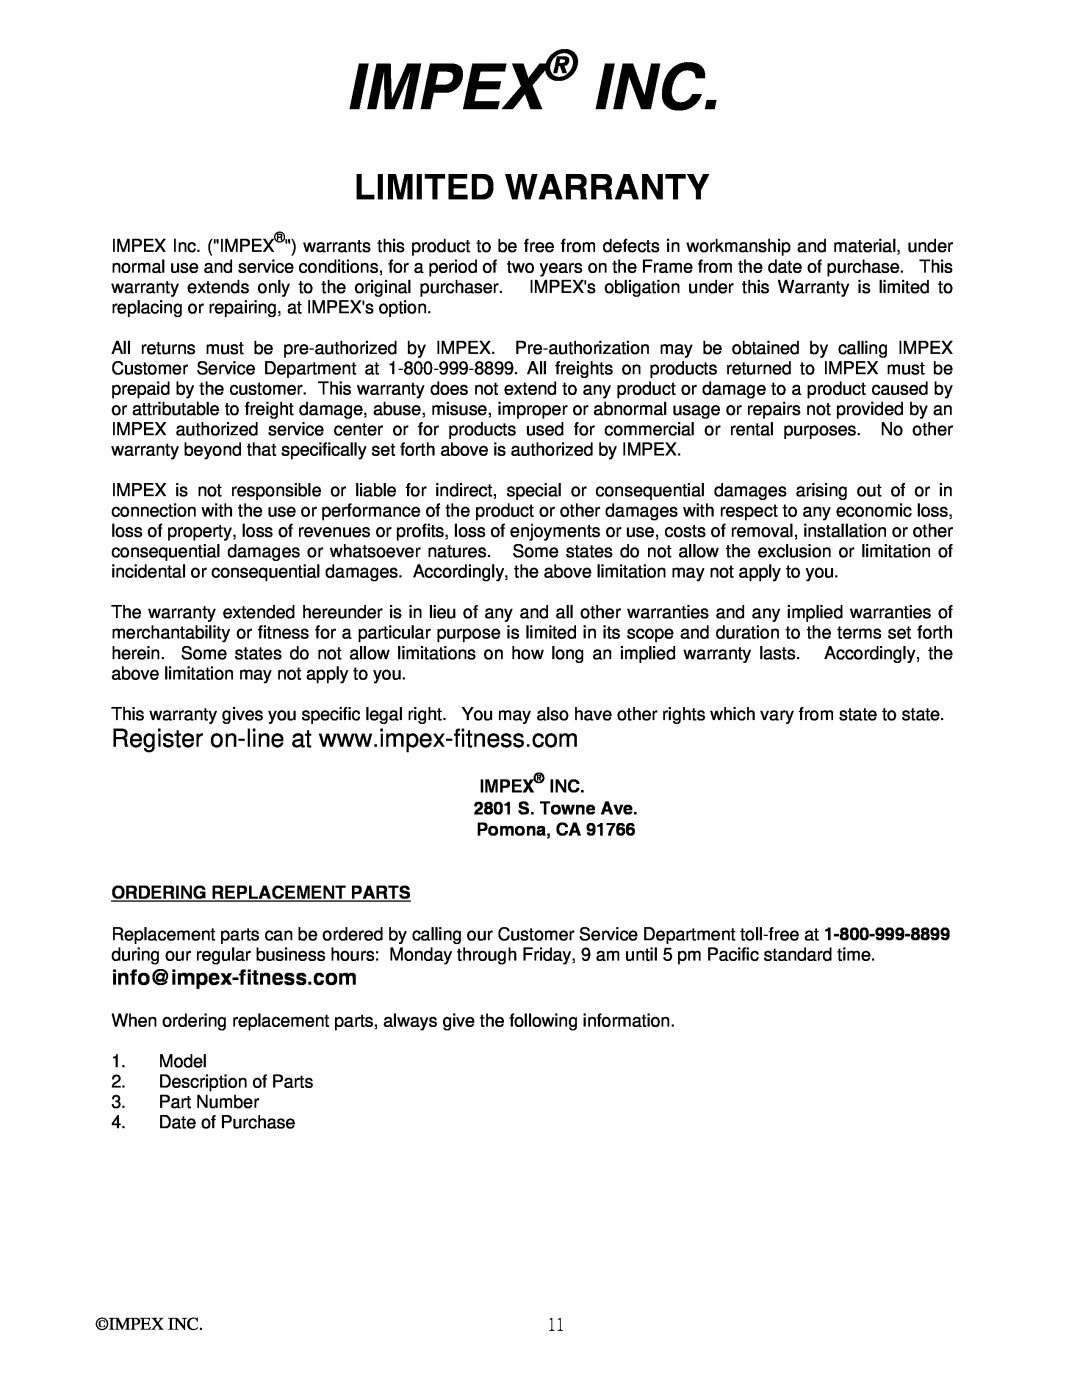 Impex MWB-715N manual Impex Inc, Limited Warranty, IMPEX INC 2801 S. Towne Ave Pomona, CA ORDERING REPLACEMENT PARTS 